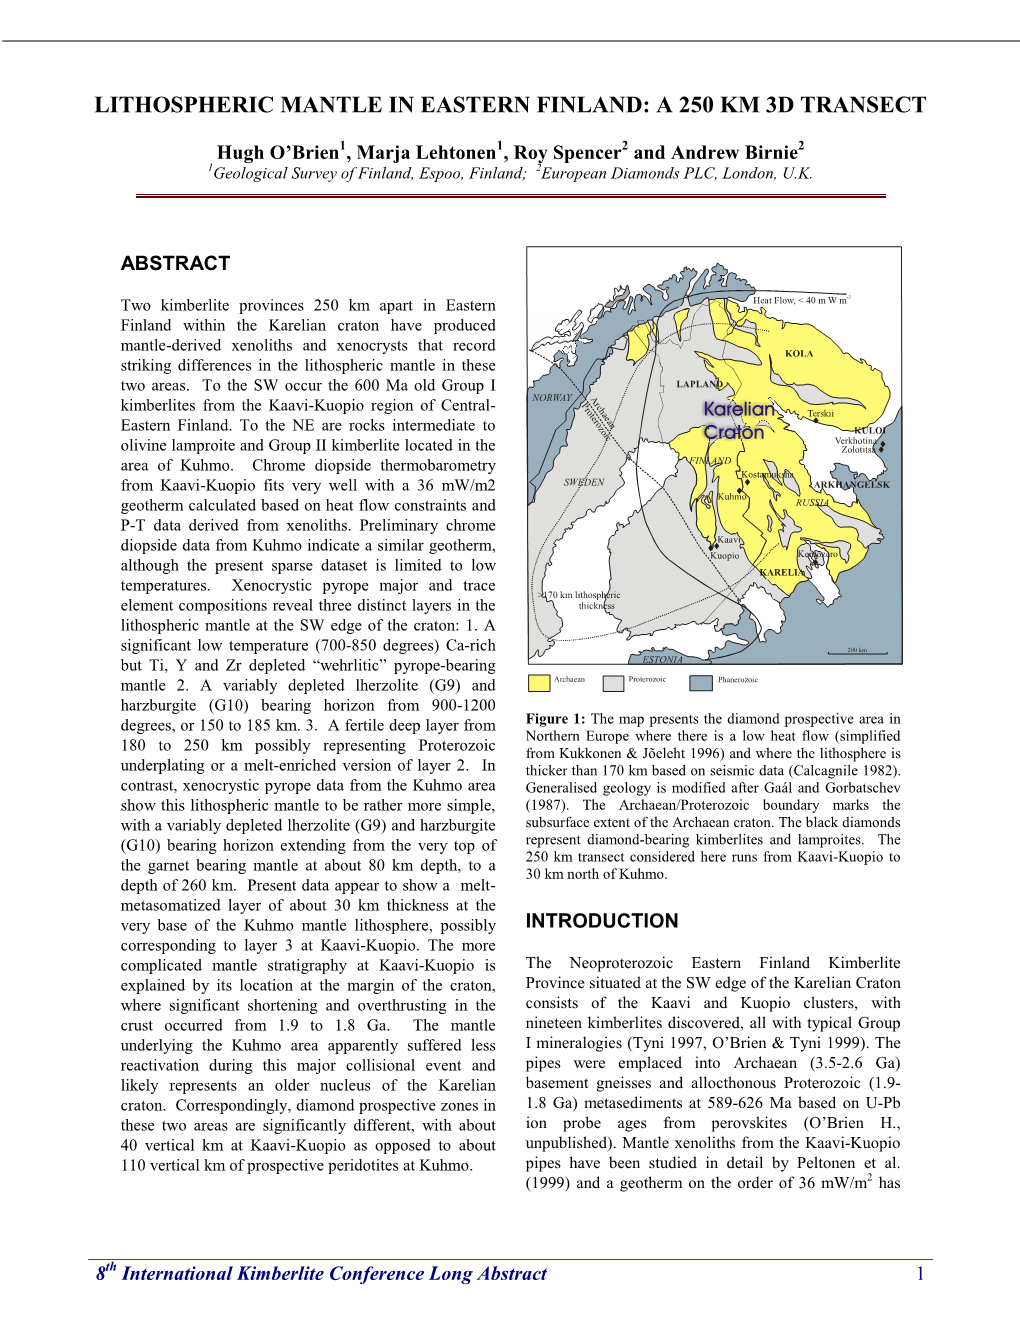 Lithospheric Mantle in Eastern Finland: a 250 Km 3D Transect